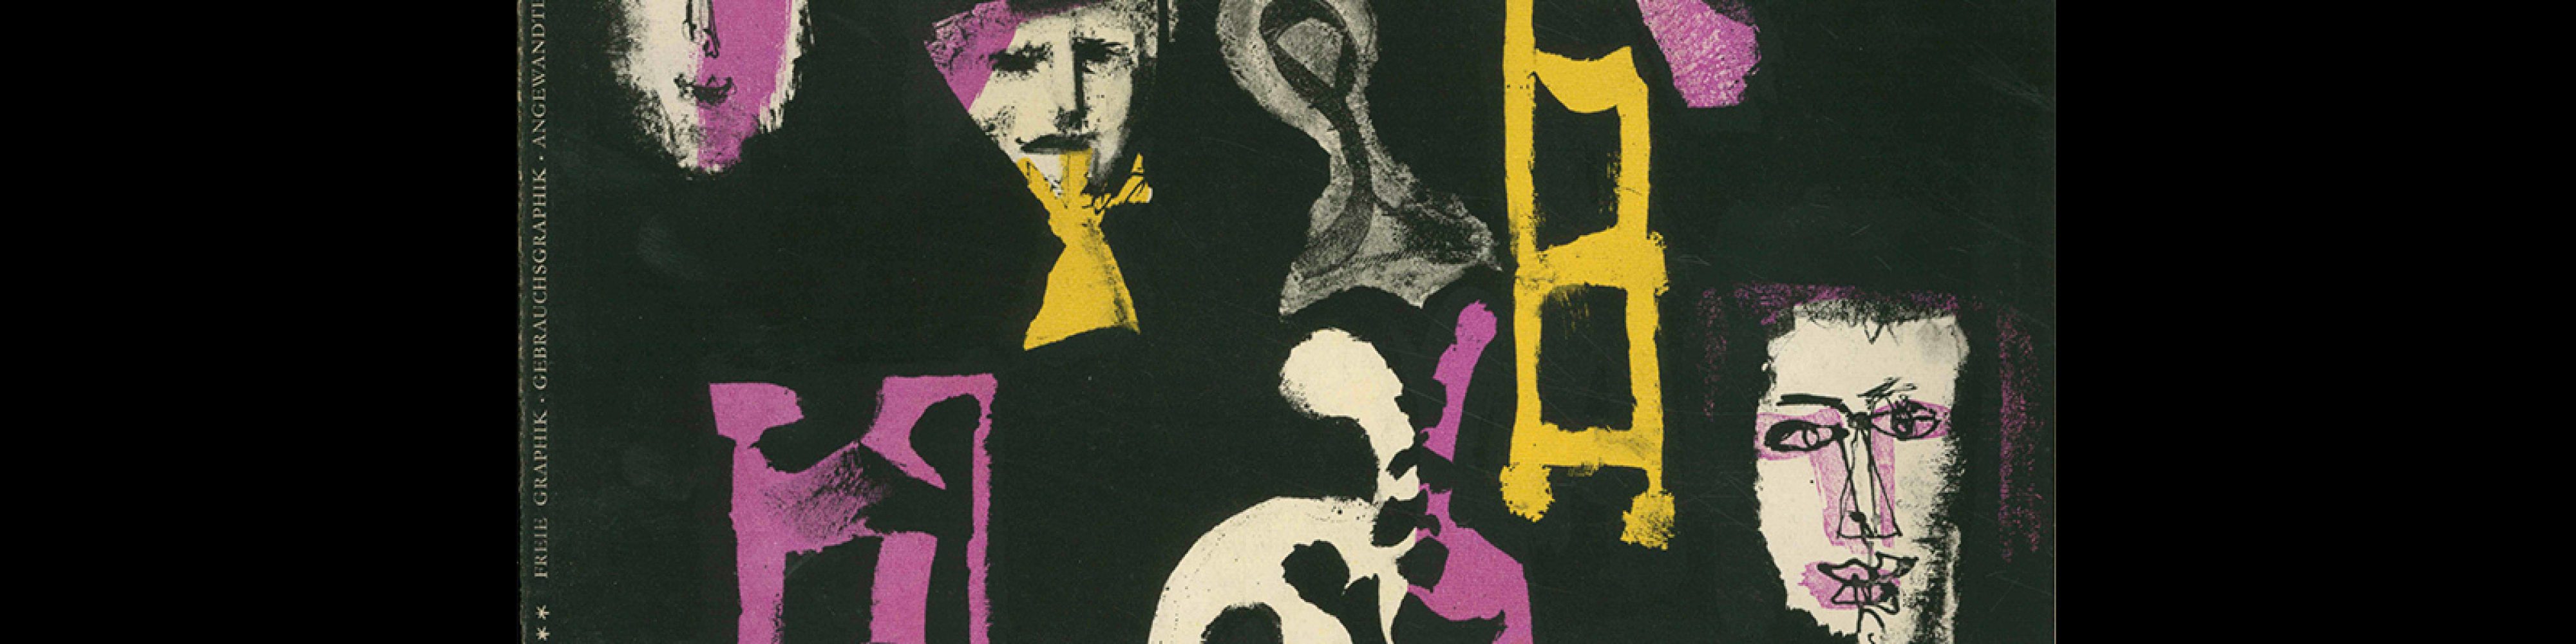 Graphis 34, 1951. Cover design by Antoni Clavé